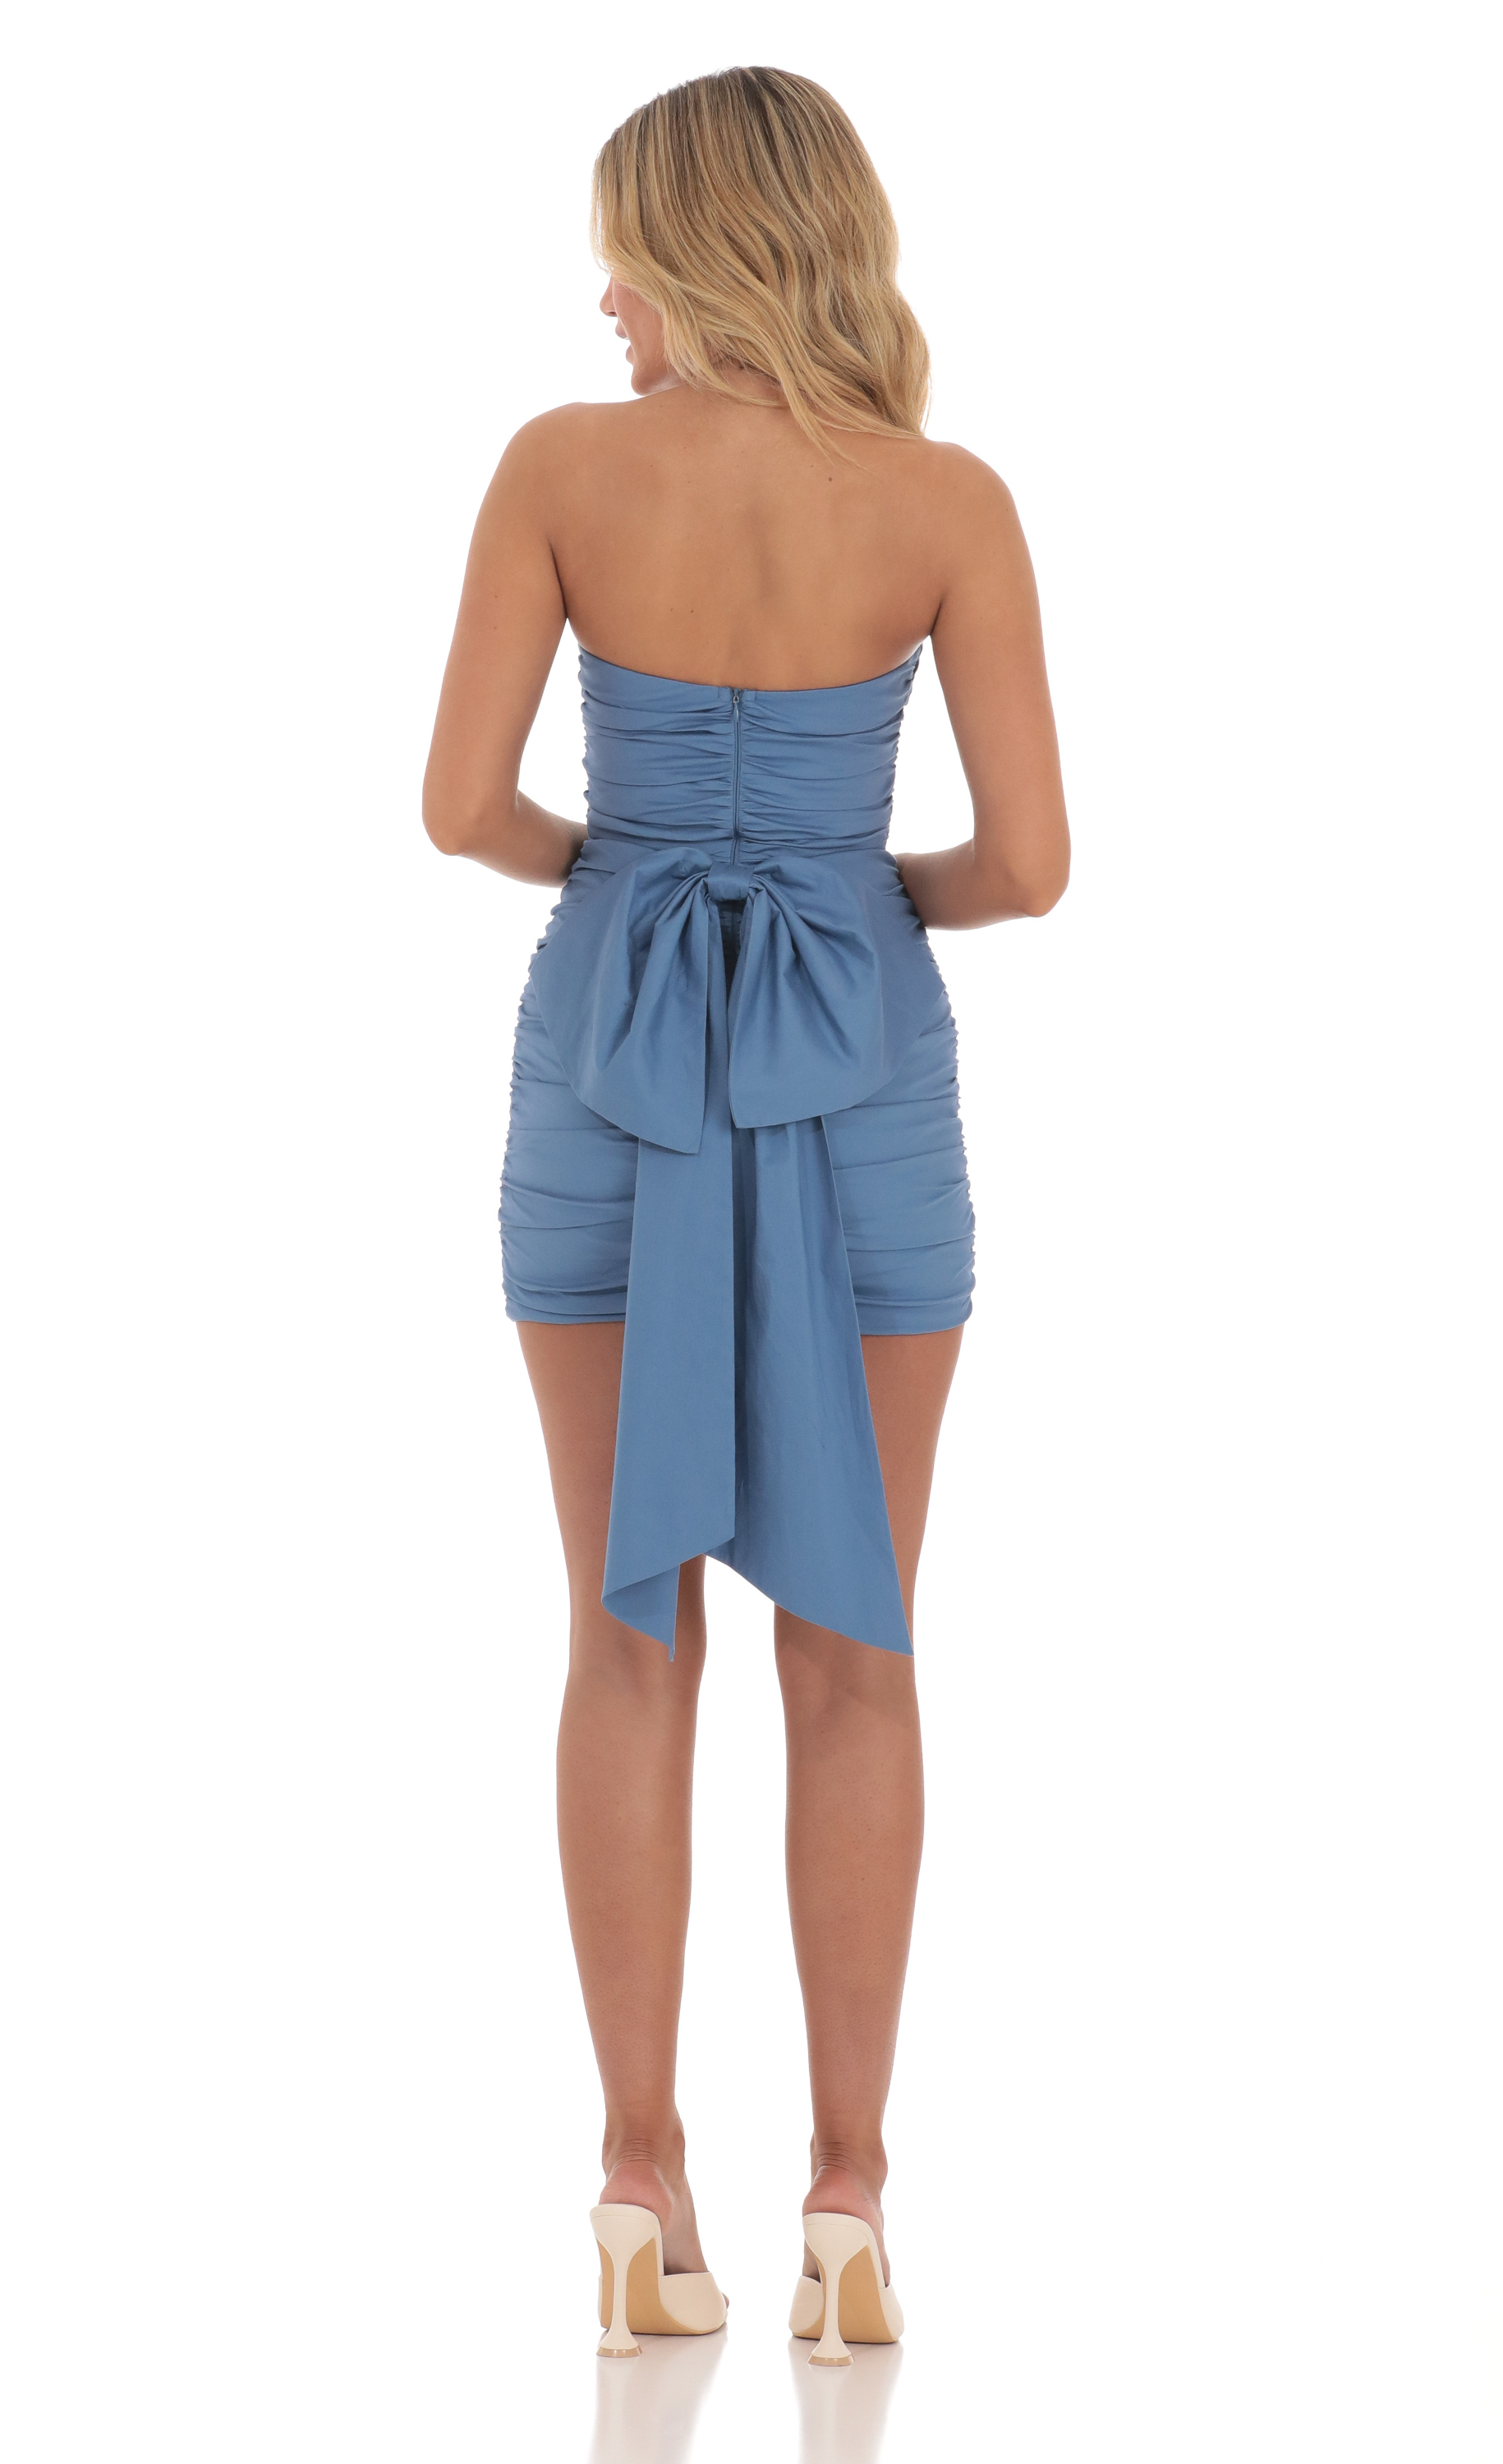 Attachable Bow Strapless Dress in Blue